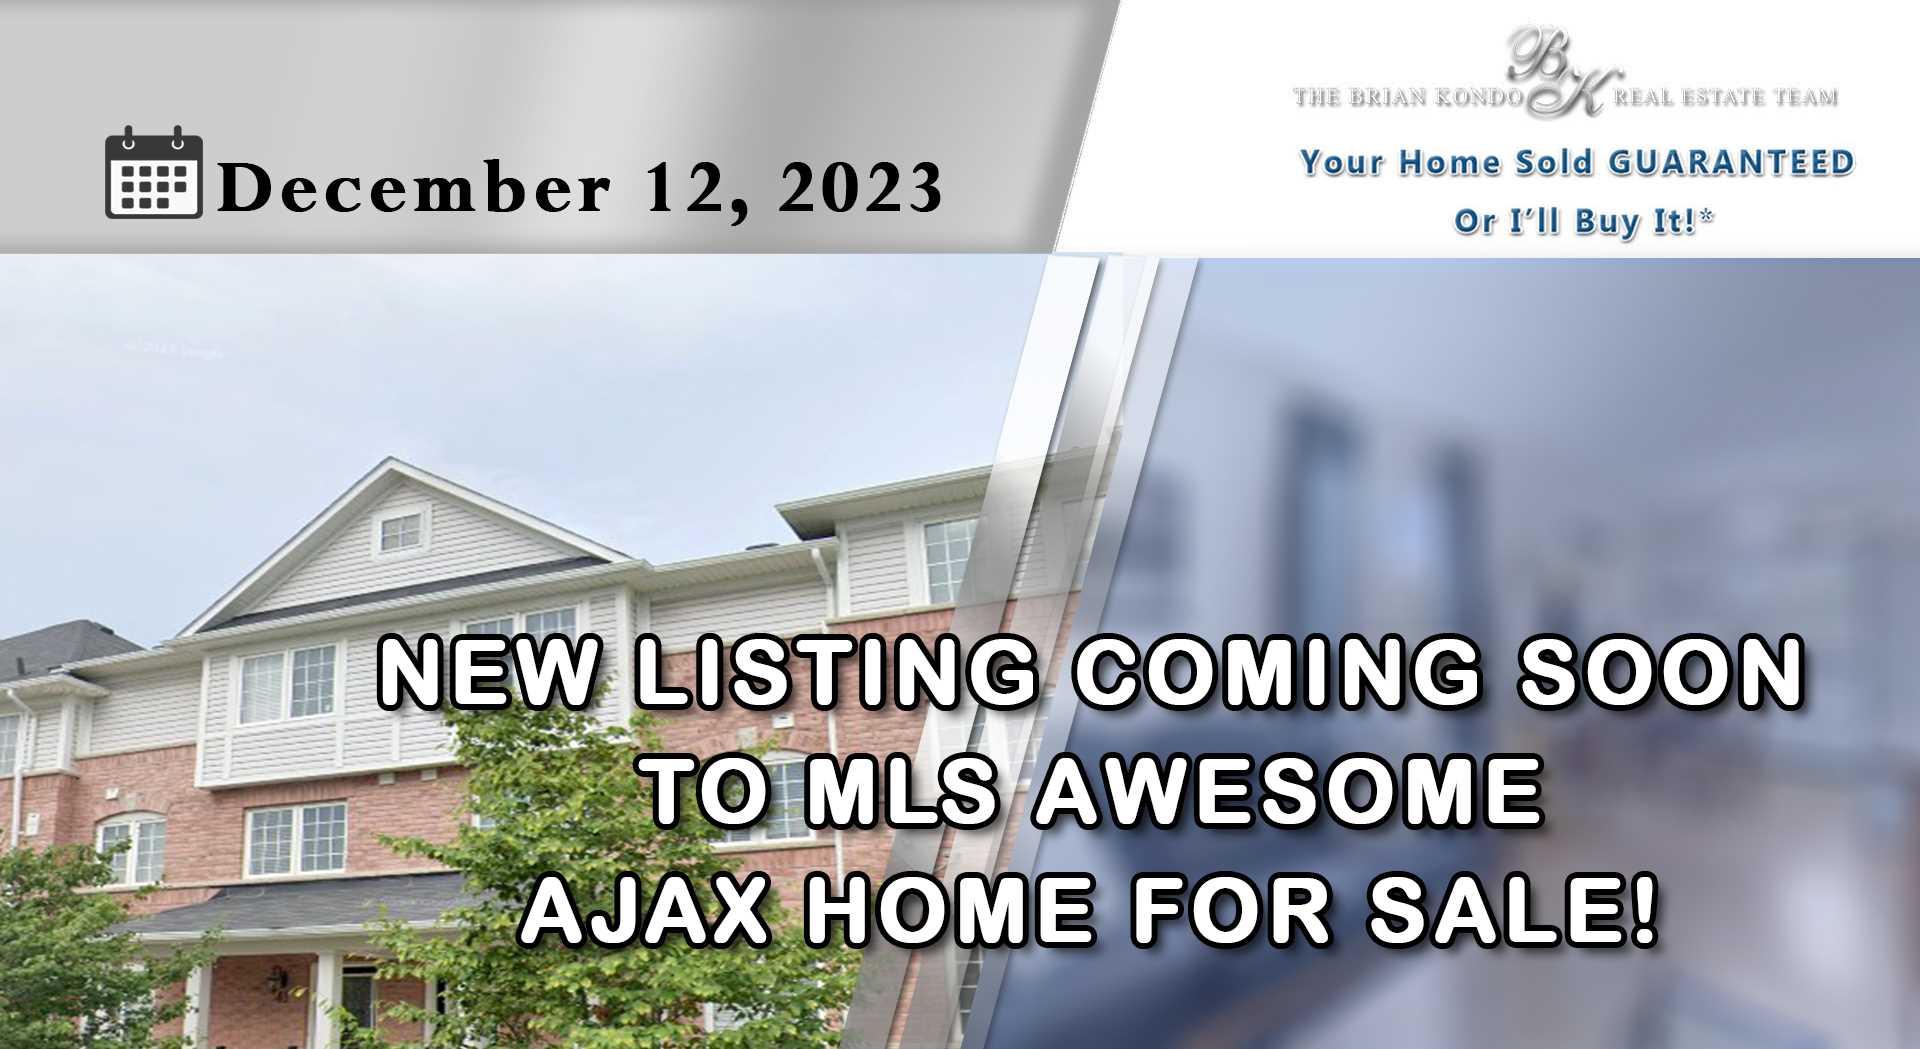 NEW LISTING COMING SOON TO MLS AWESOME AJAX HOME FOR SALE!